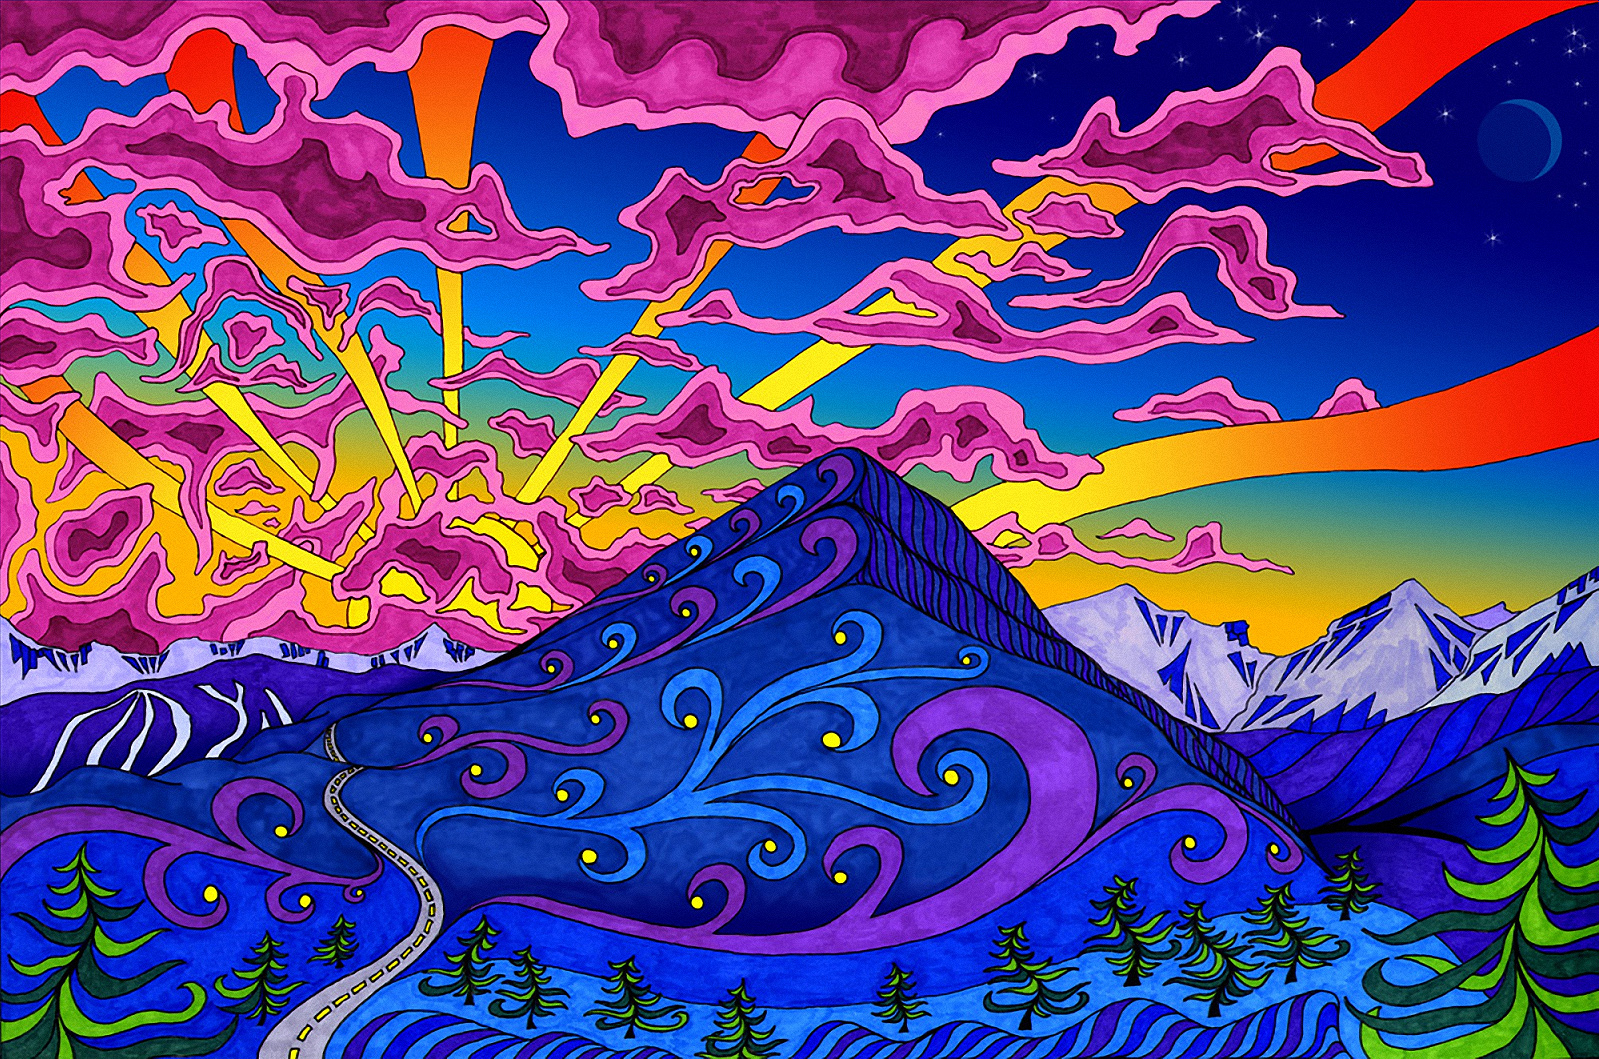 Free Download Psychedelic Wallpaper Wallpapers Hd Quality 1599x1059 For Your Desktop Mobile Tablet Explore 69 Psychedelic Hd Wallpapers Trippy Wallpapers Hd Psychedelic Wallpaper Desktop